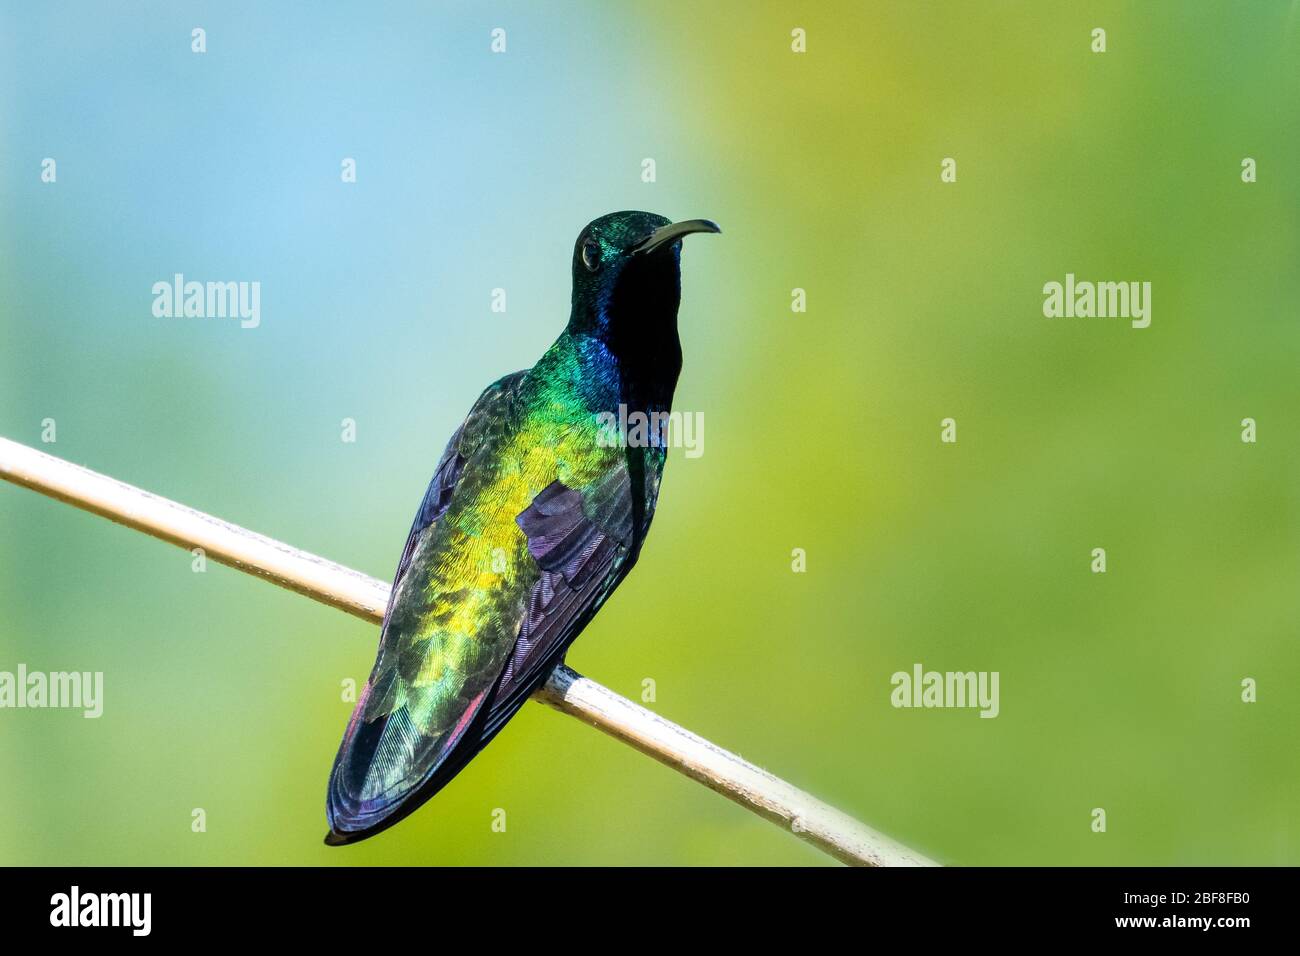 A Black-throated Mango perching on a bamboo perch in the bright sun with a blurred background. Stock Photo